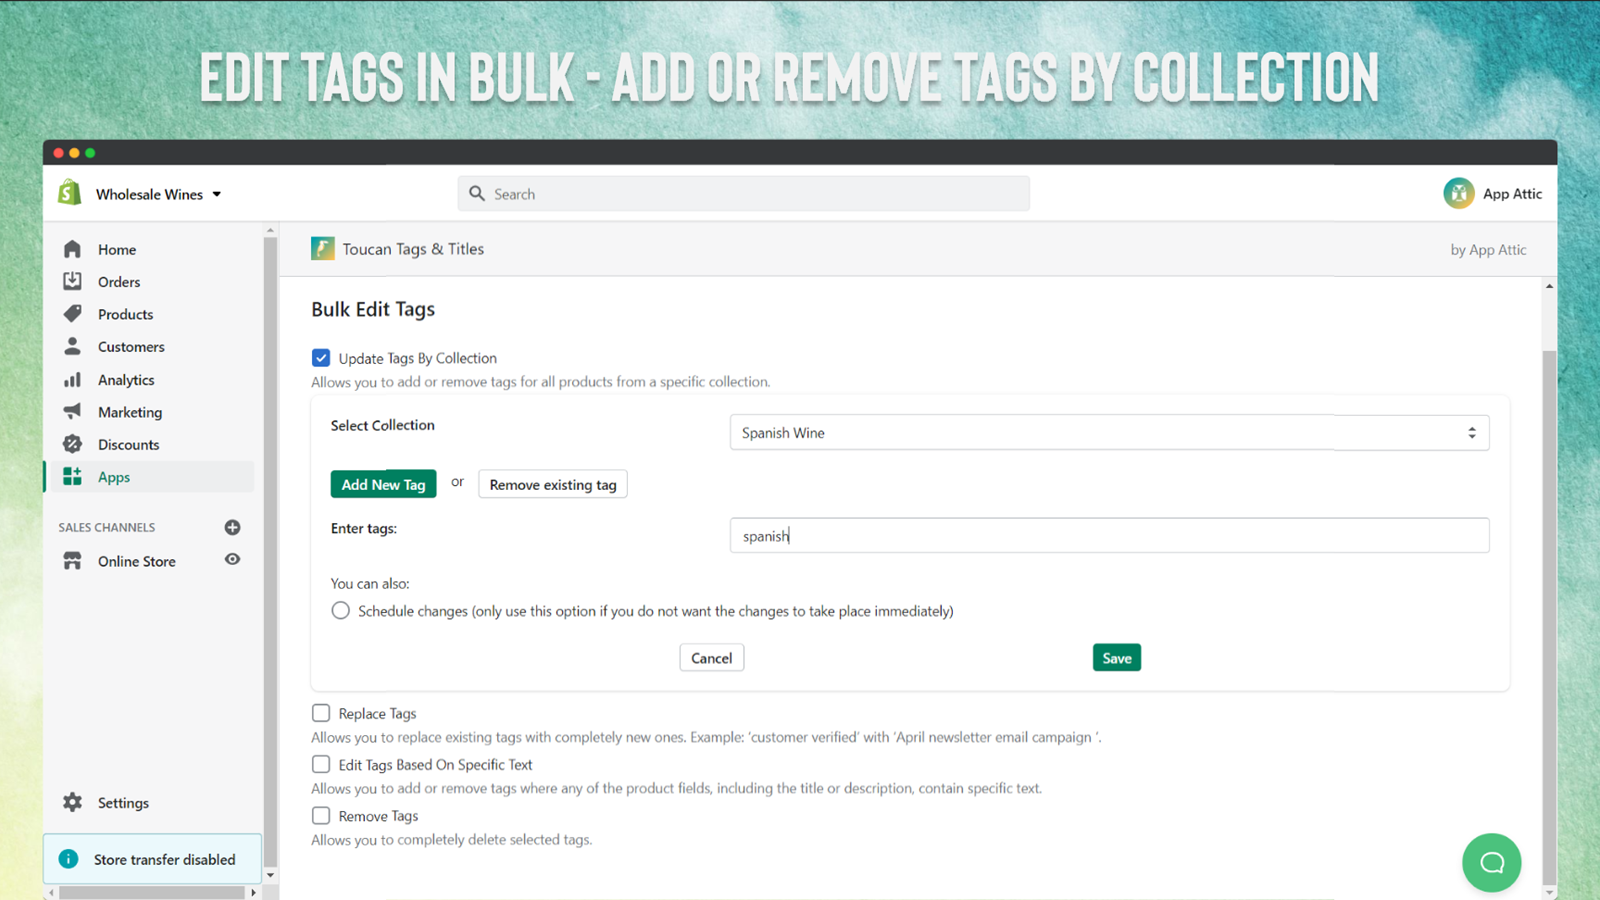 Edit Tags in Bulk - add or remove tags by collection